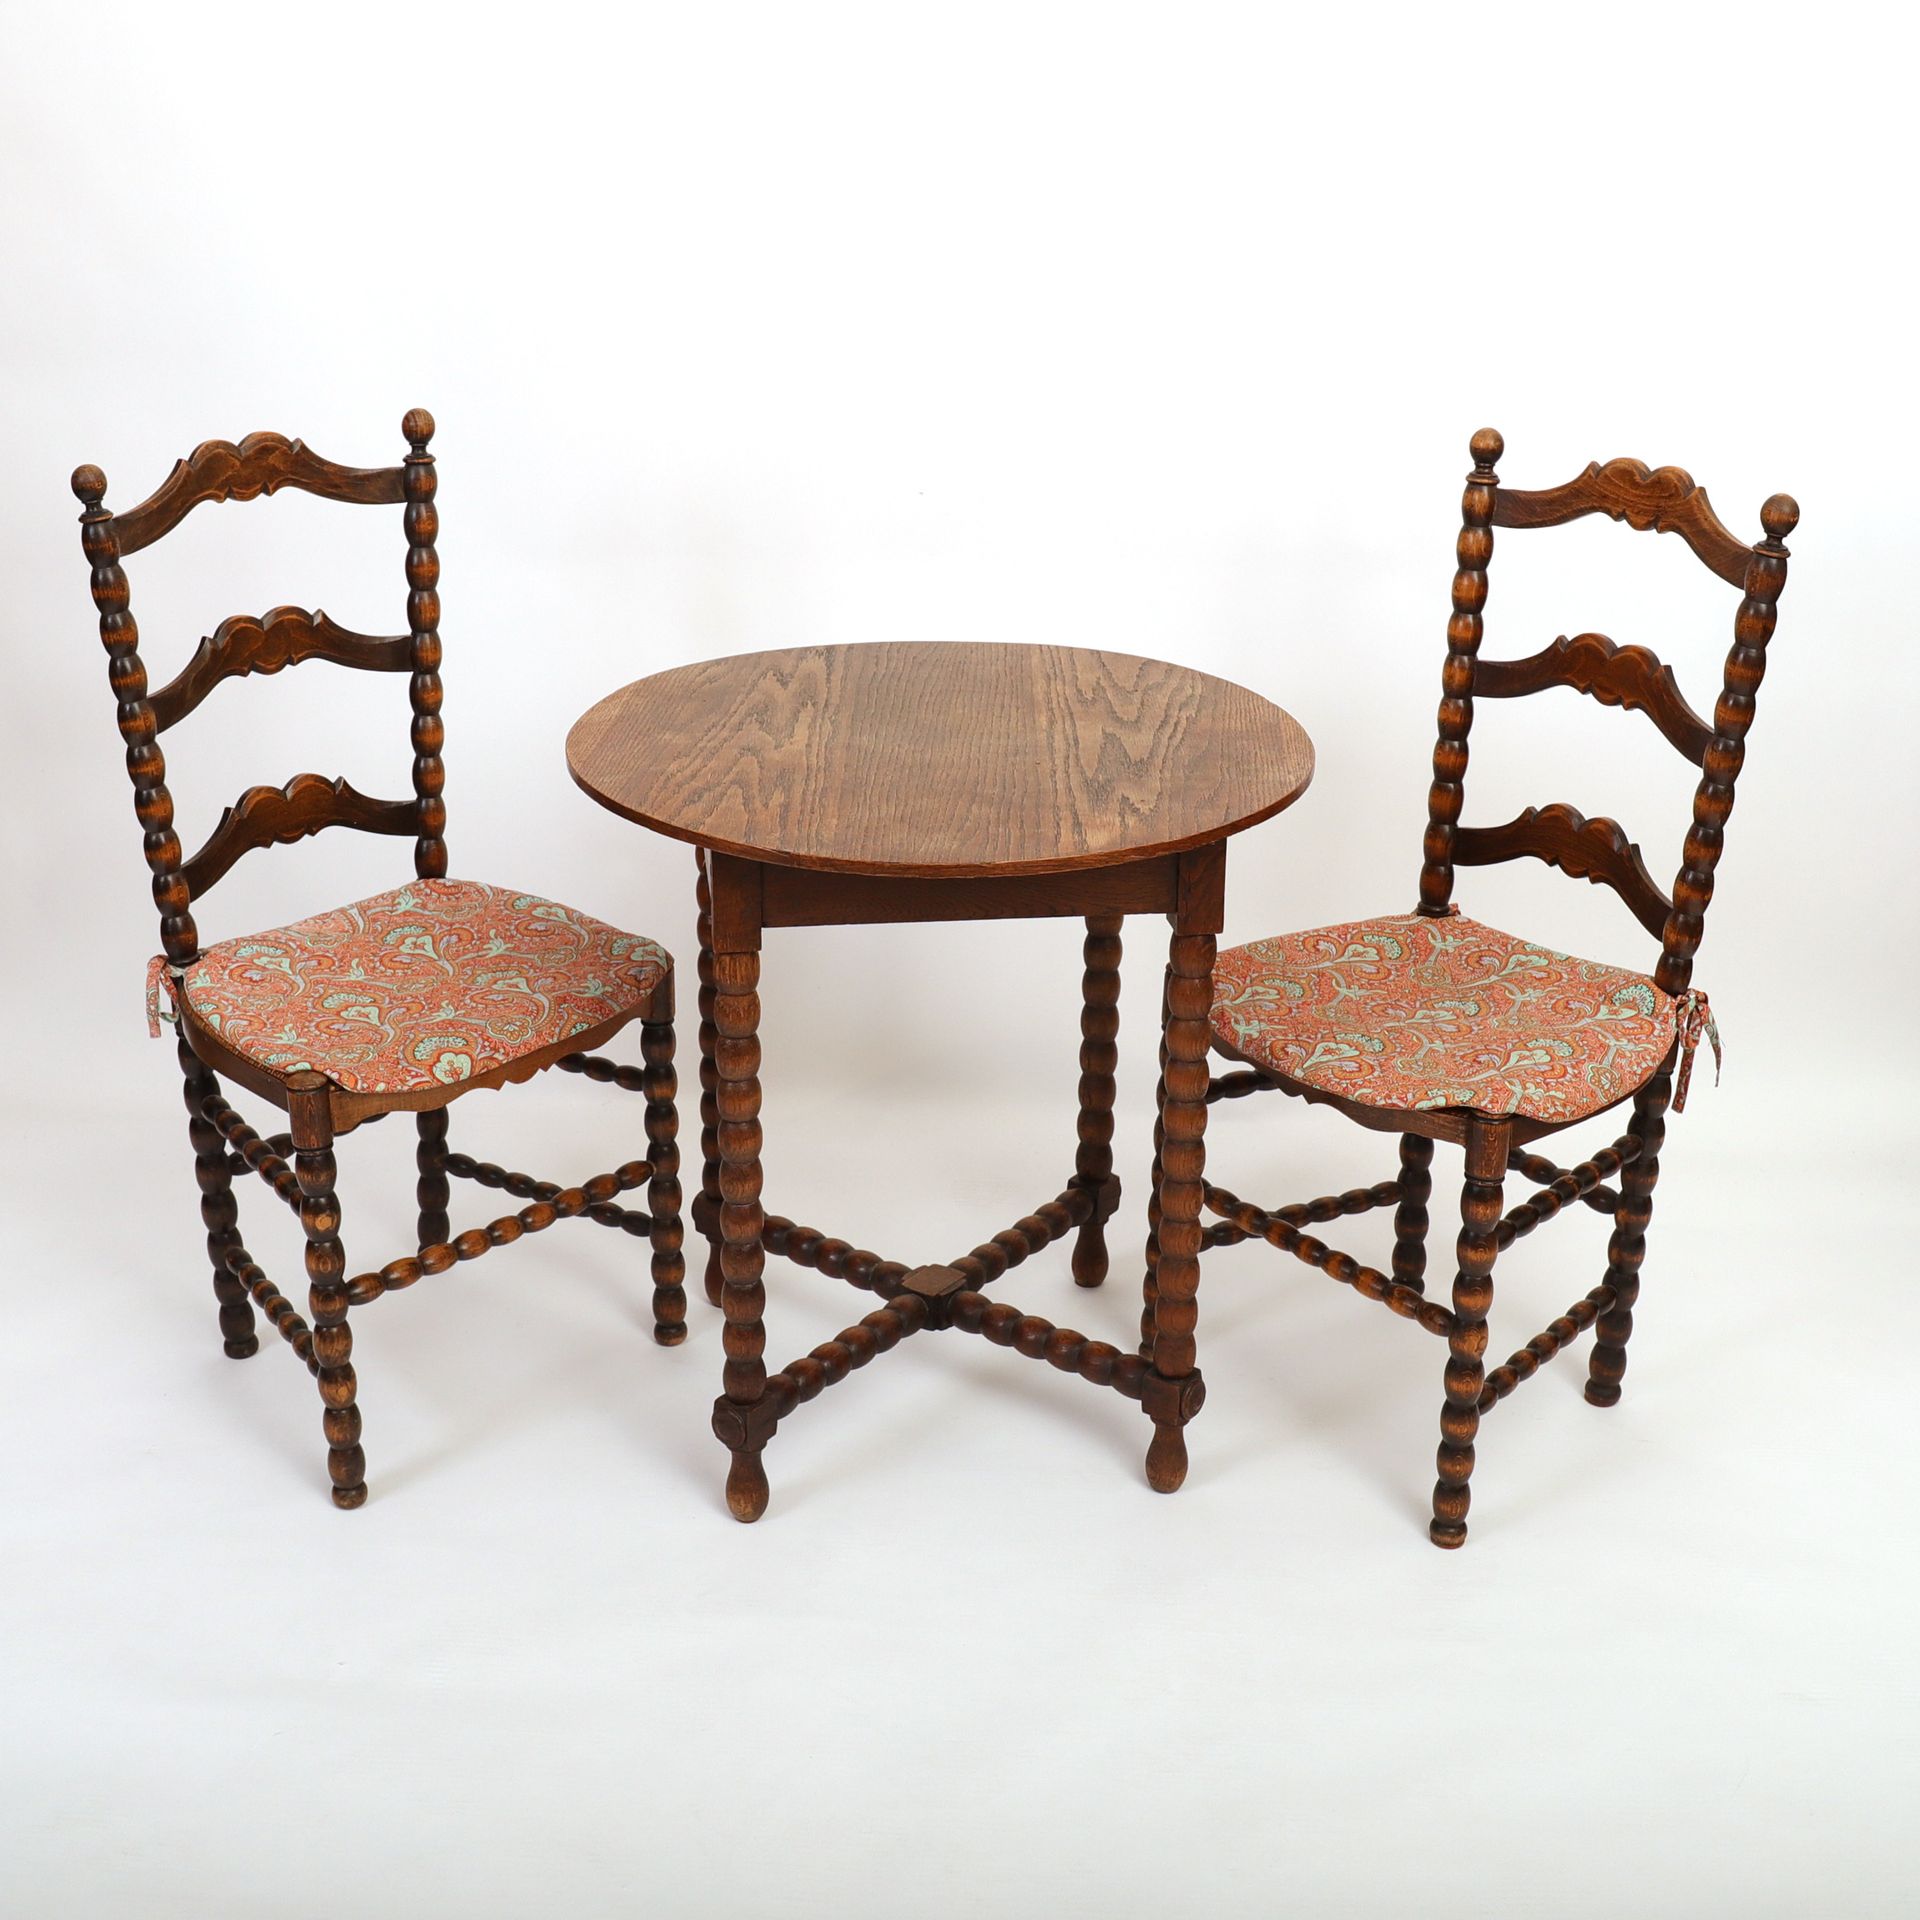 Null SMALL ROUND TABLE AND TWO PAINTED CHAIRS in wood

Provencal work, 20th cent&hellip;